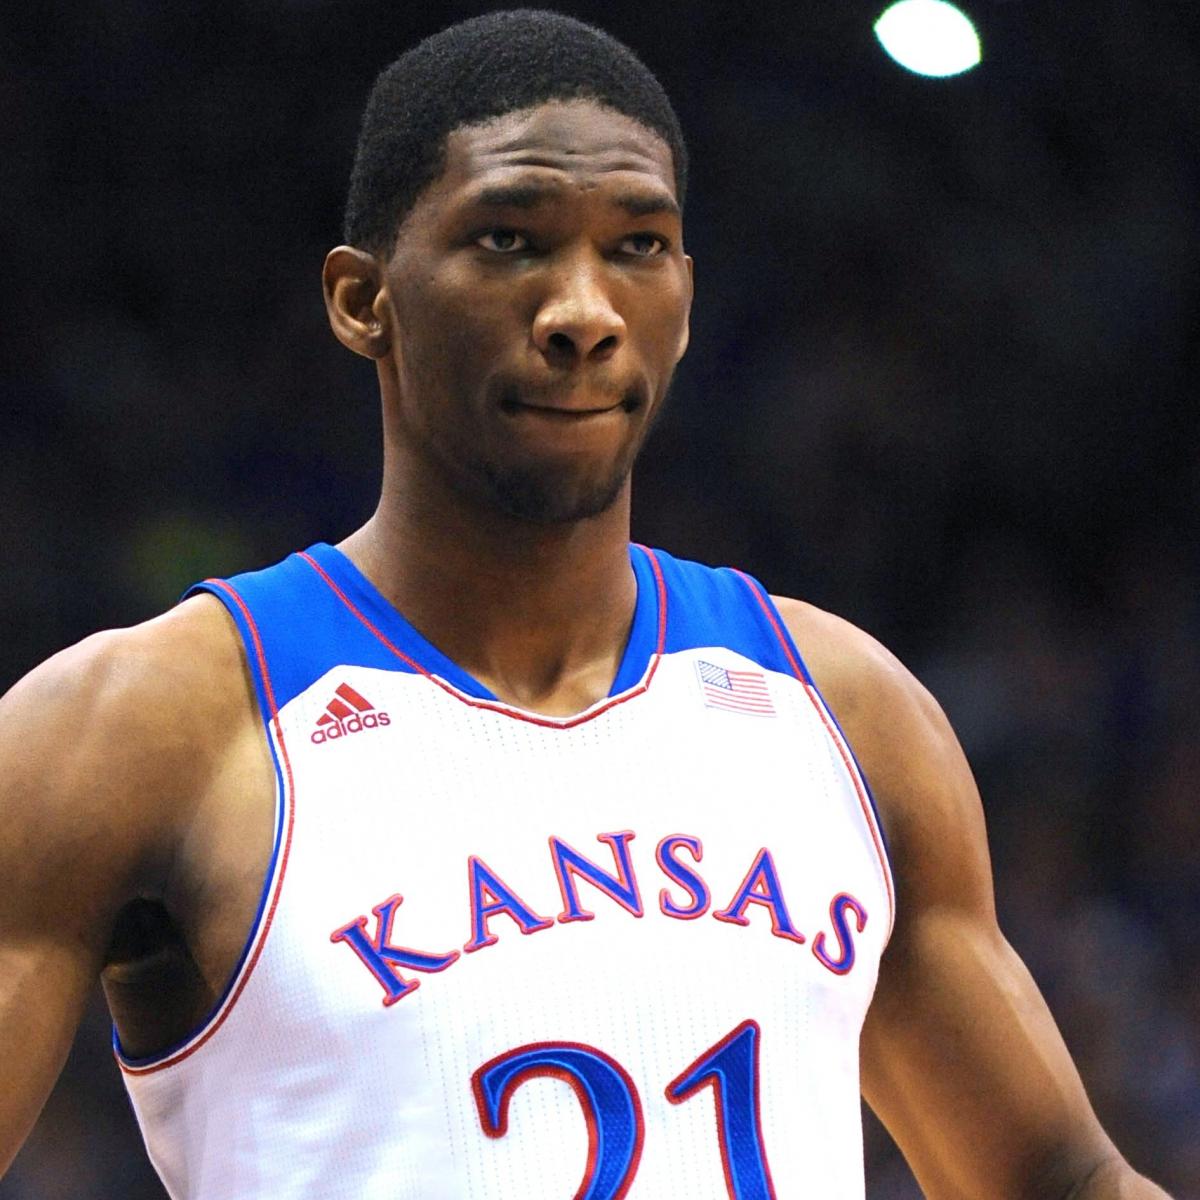 Top NBA Draft Prospect Joel Embiid Not Sure He's Ready for NBA